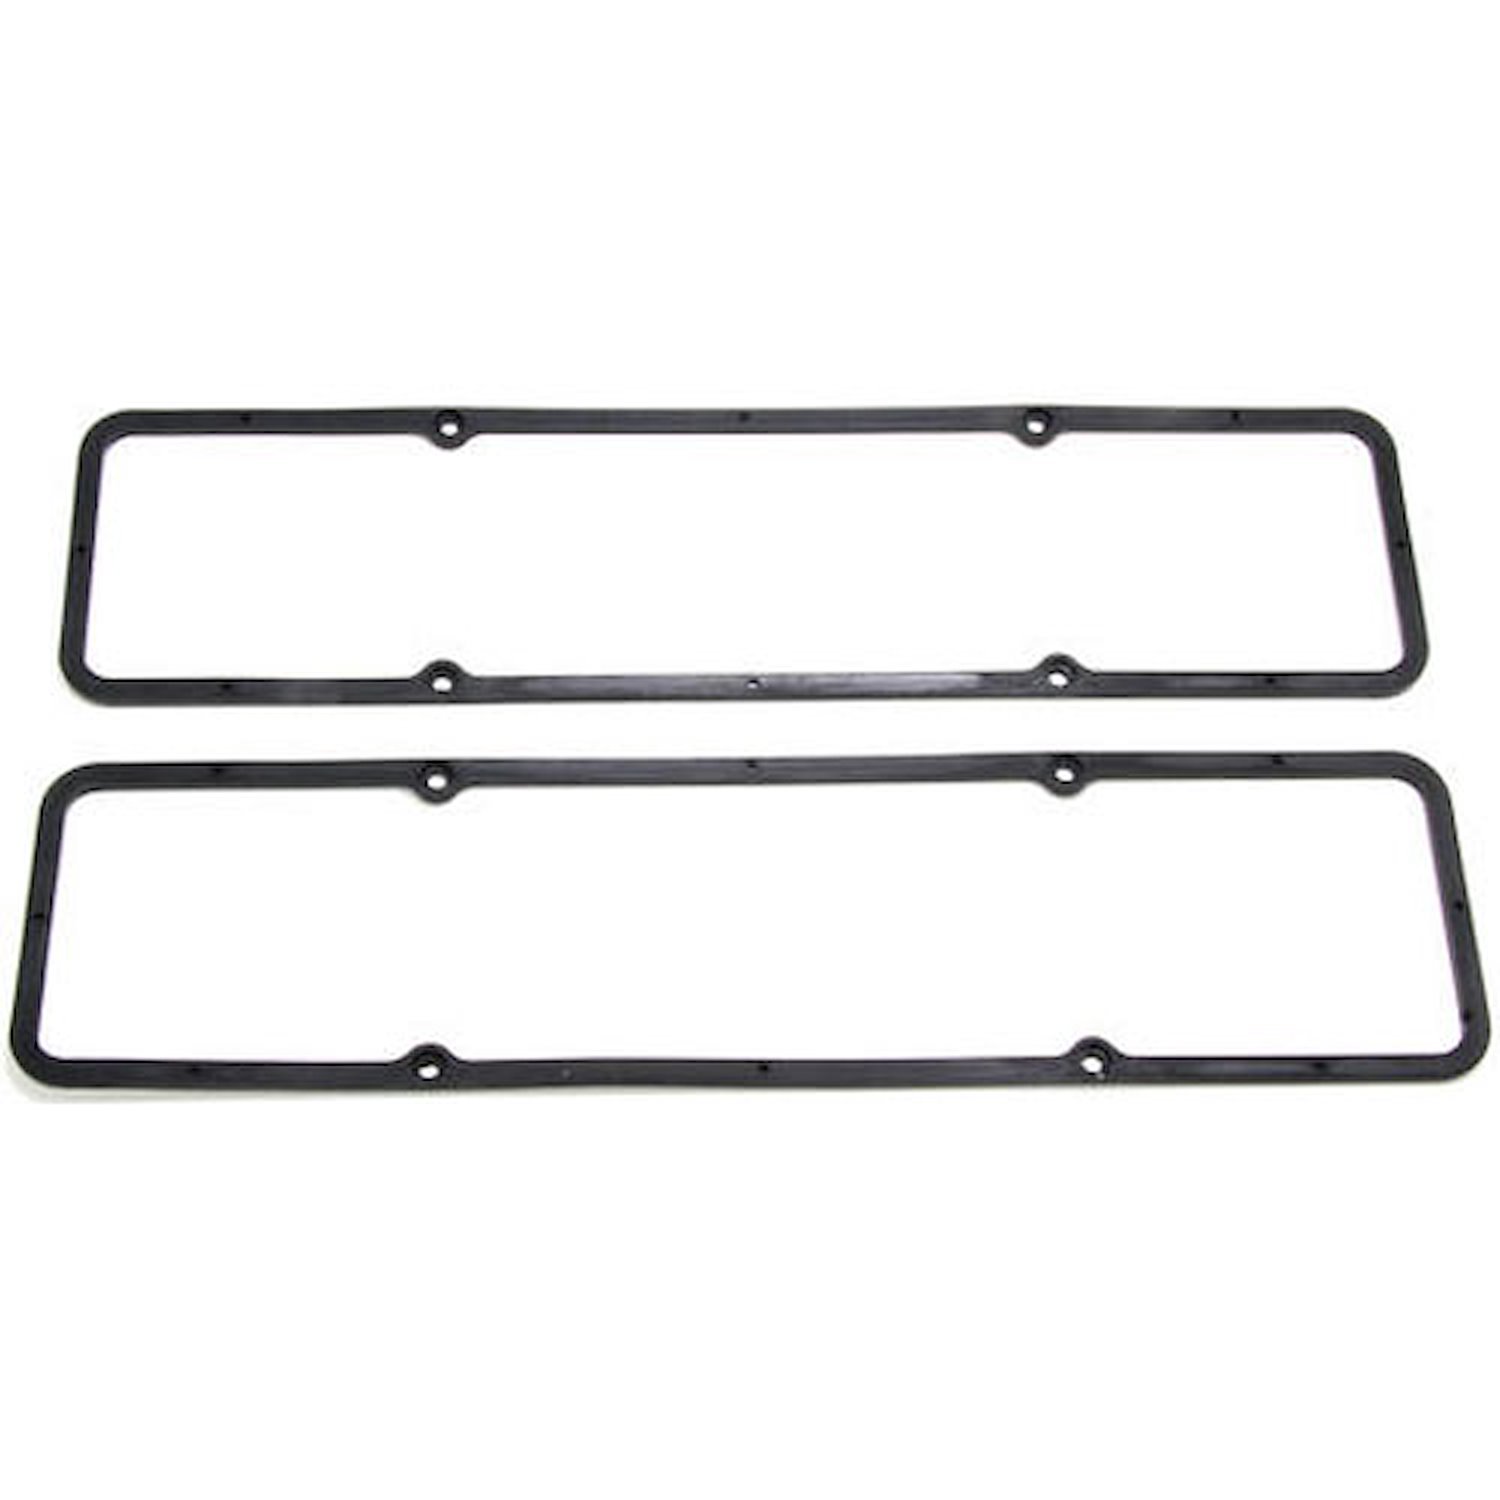 Valve Cover Gaskets 1955-86 Small Block Chevy 265-350